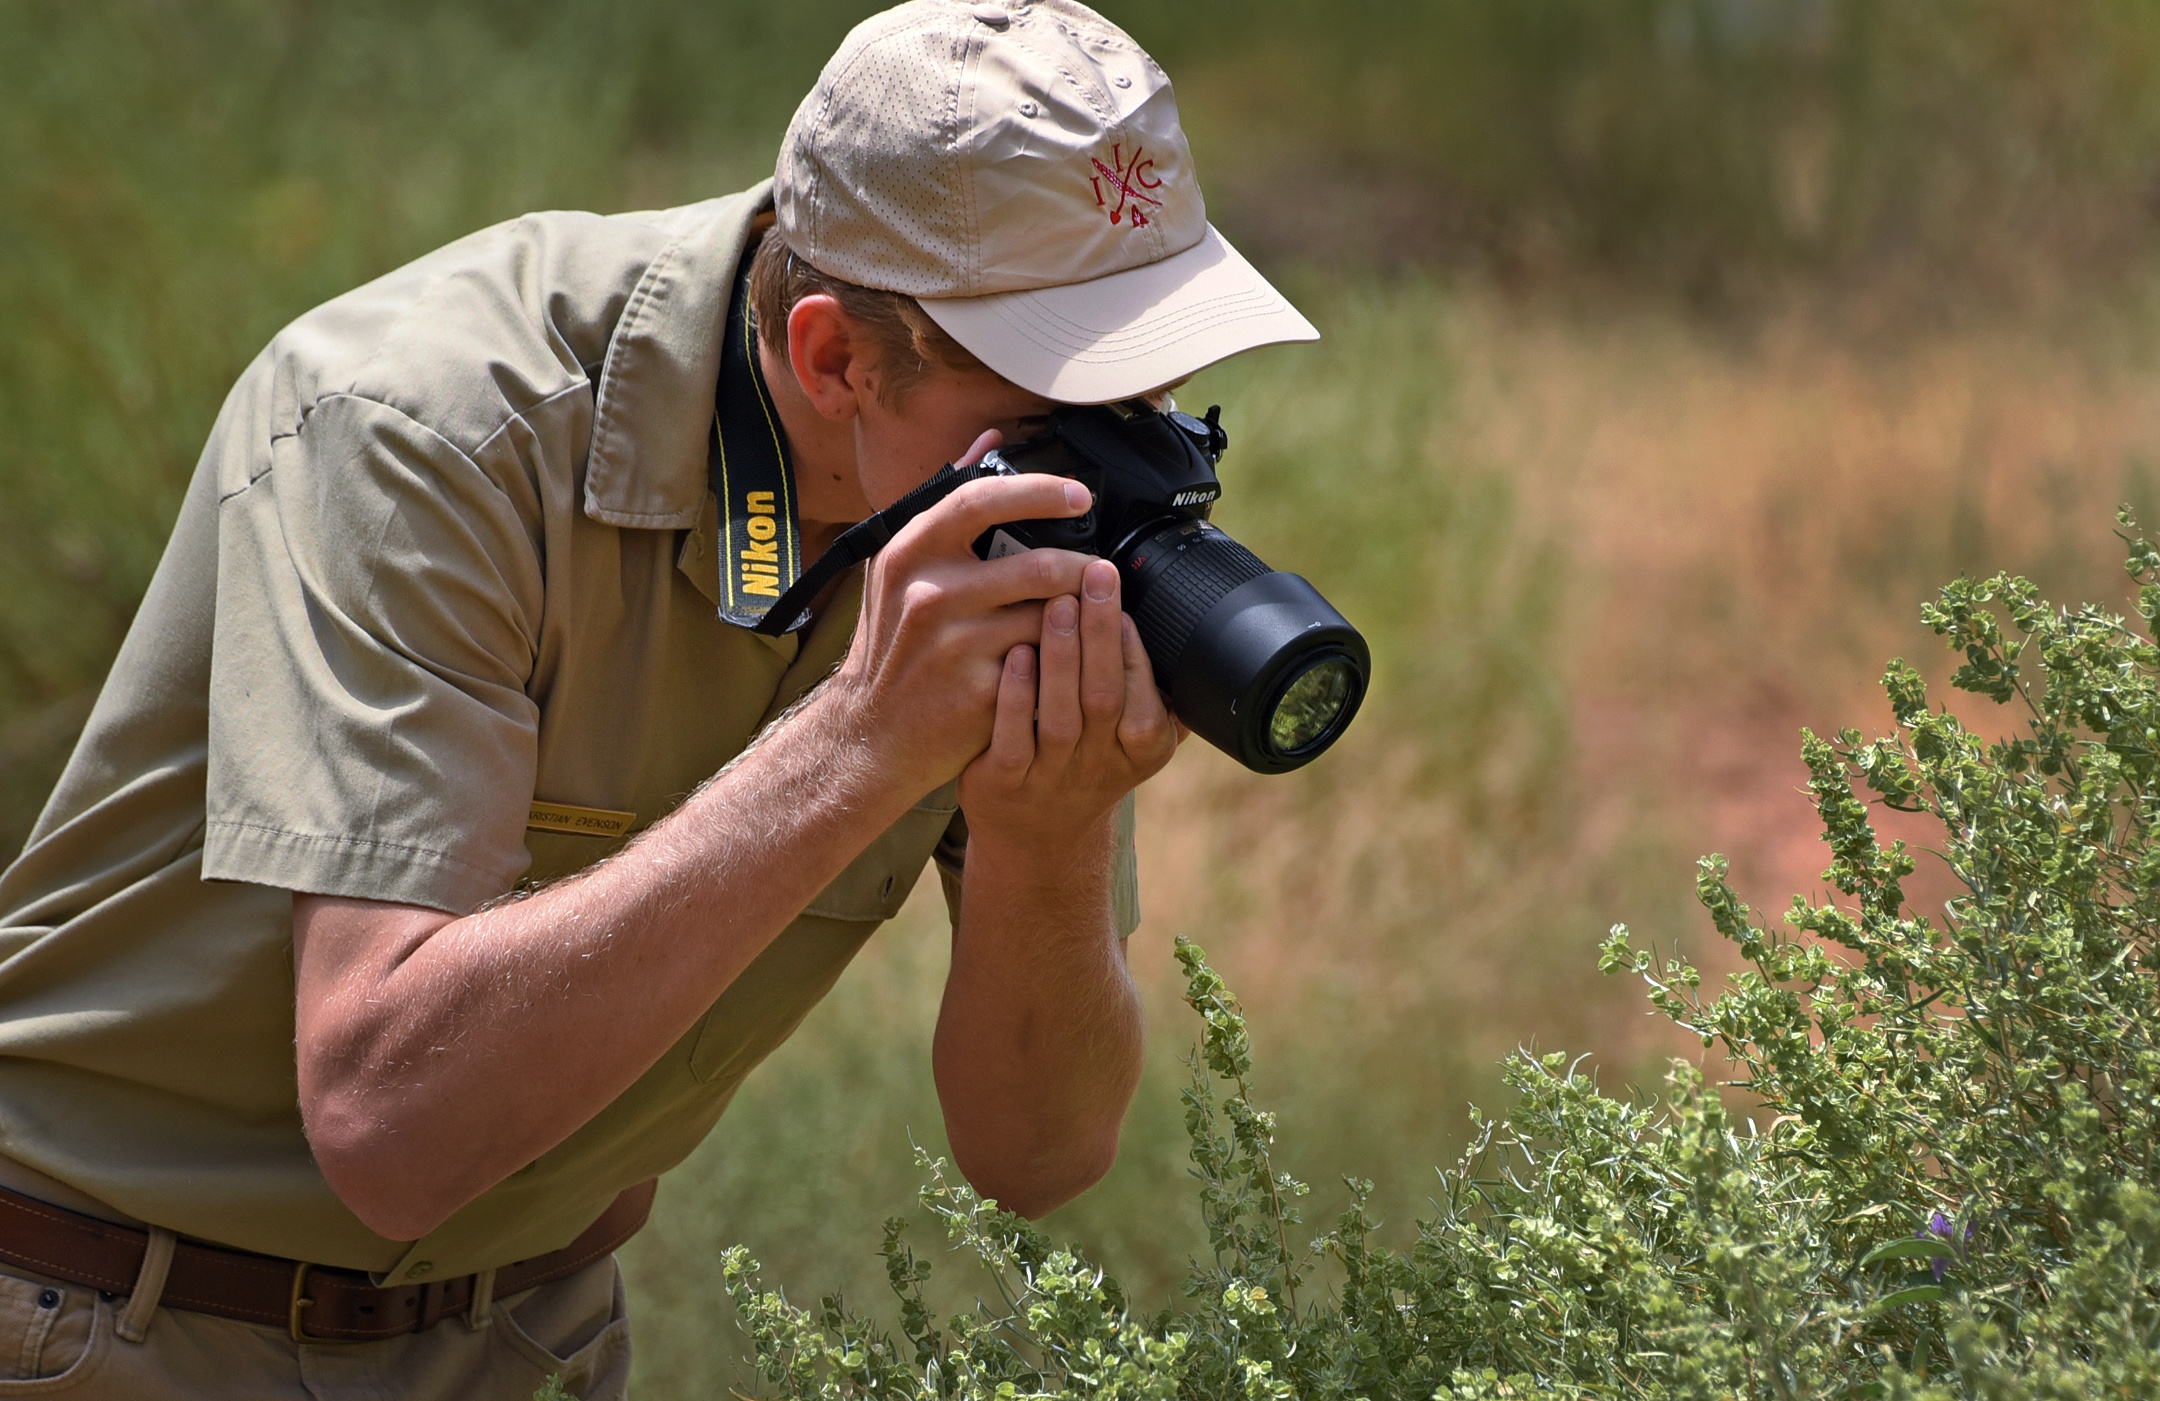 A person wearing a uniform takes a picture of a plant